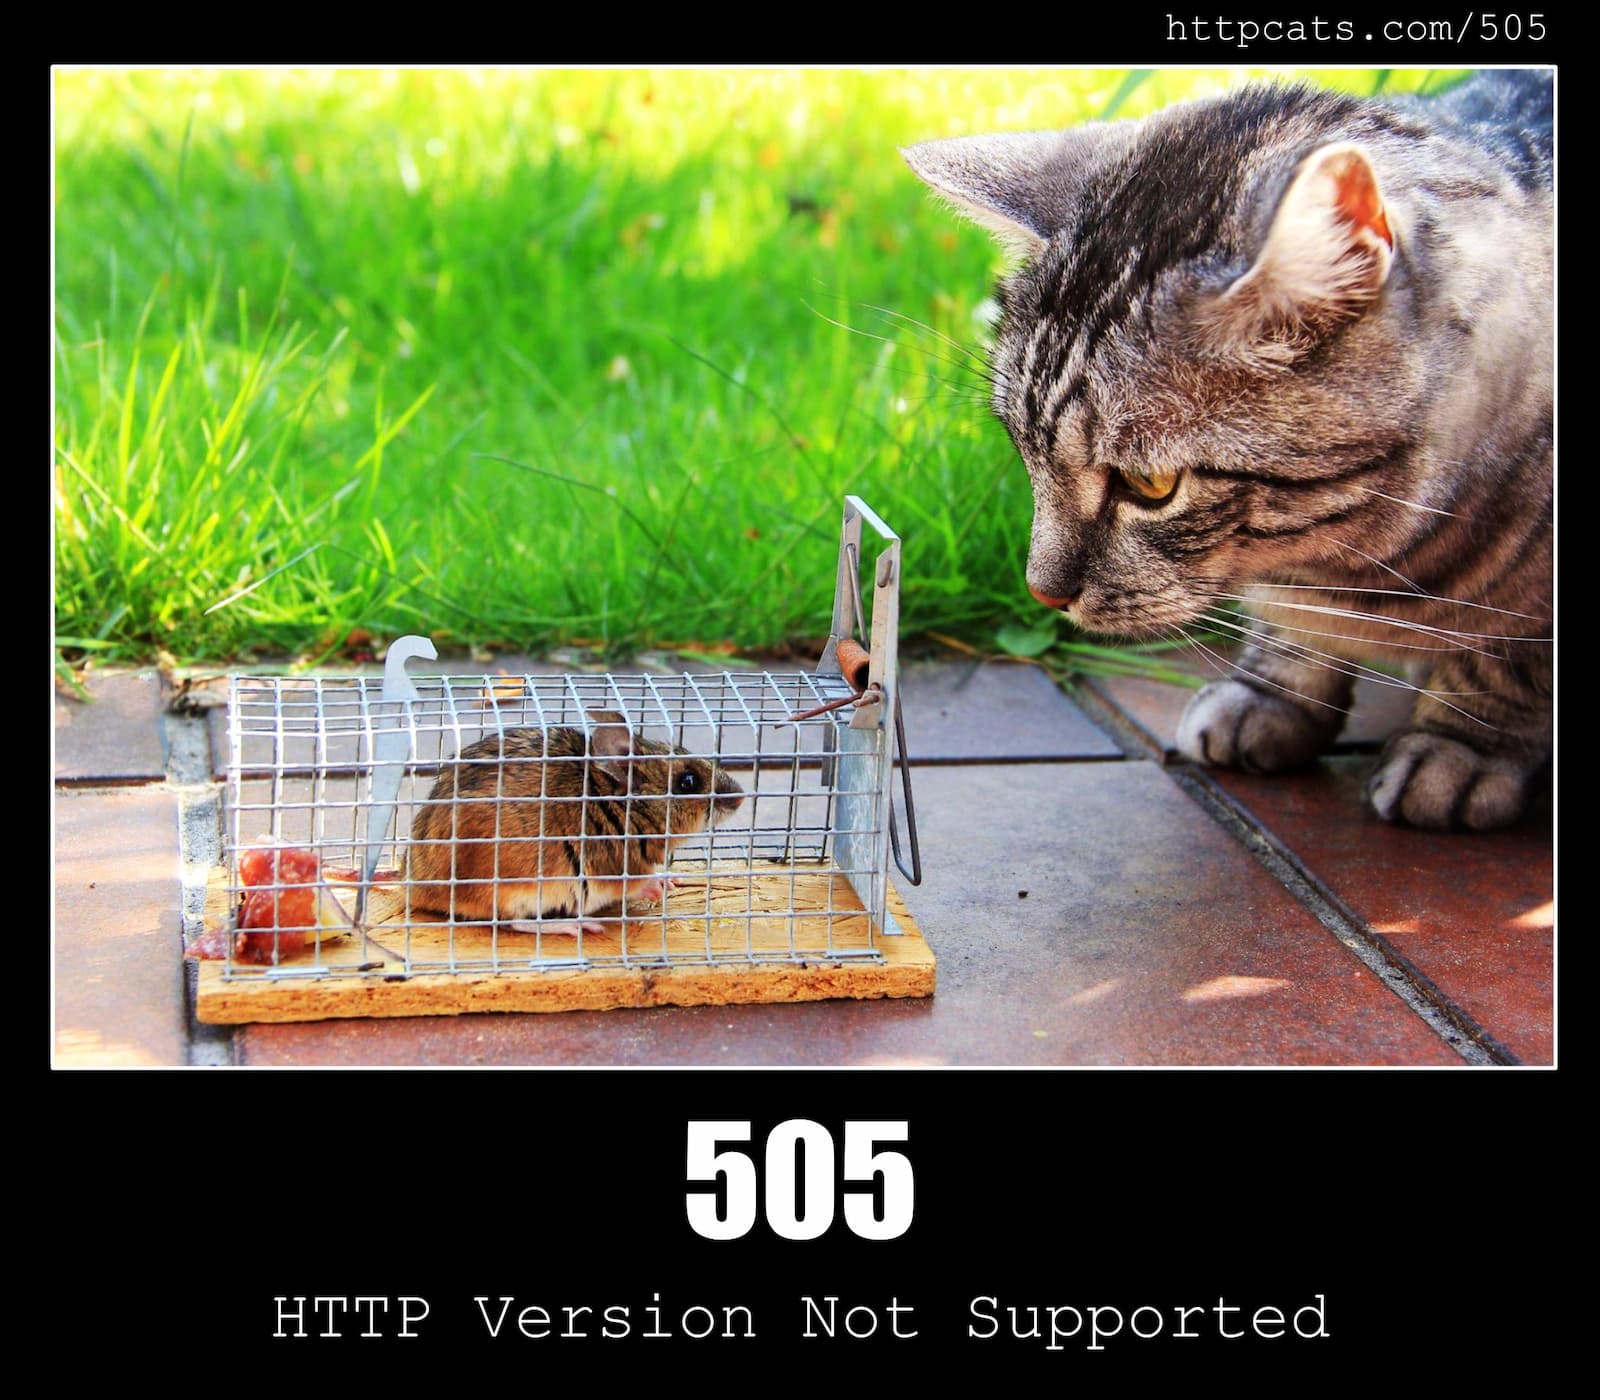 HTTP Status Code 505 HTTP Version Not Supported & Cats